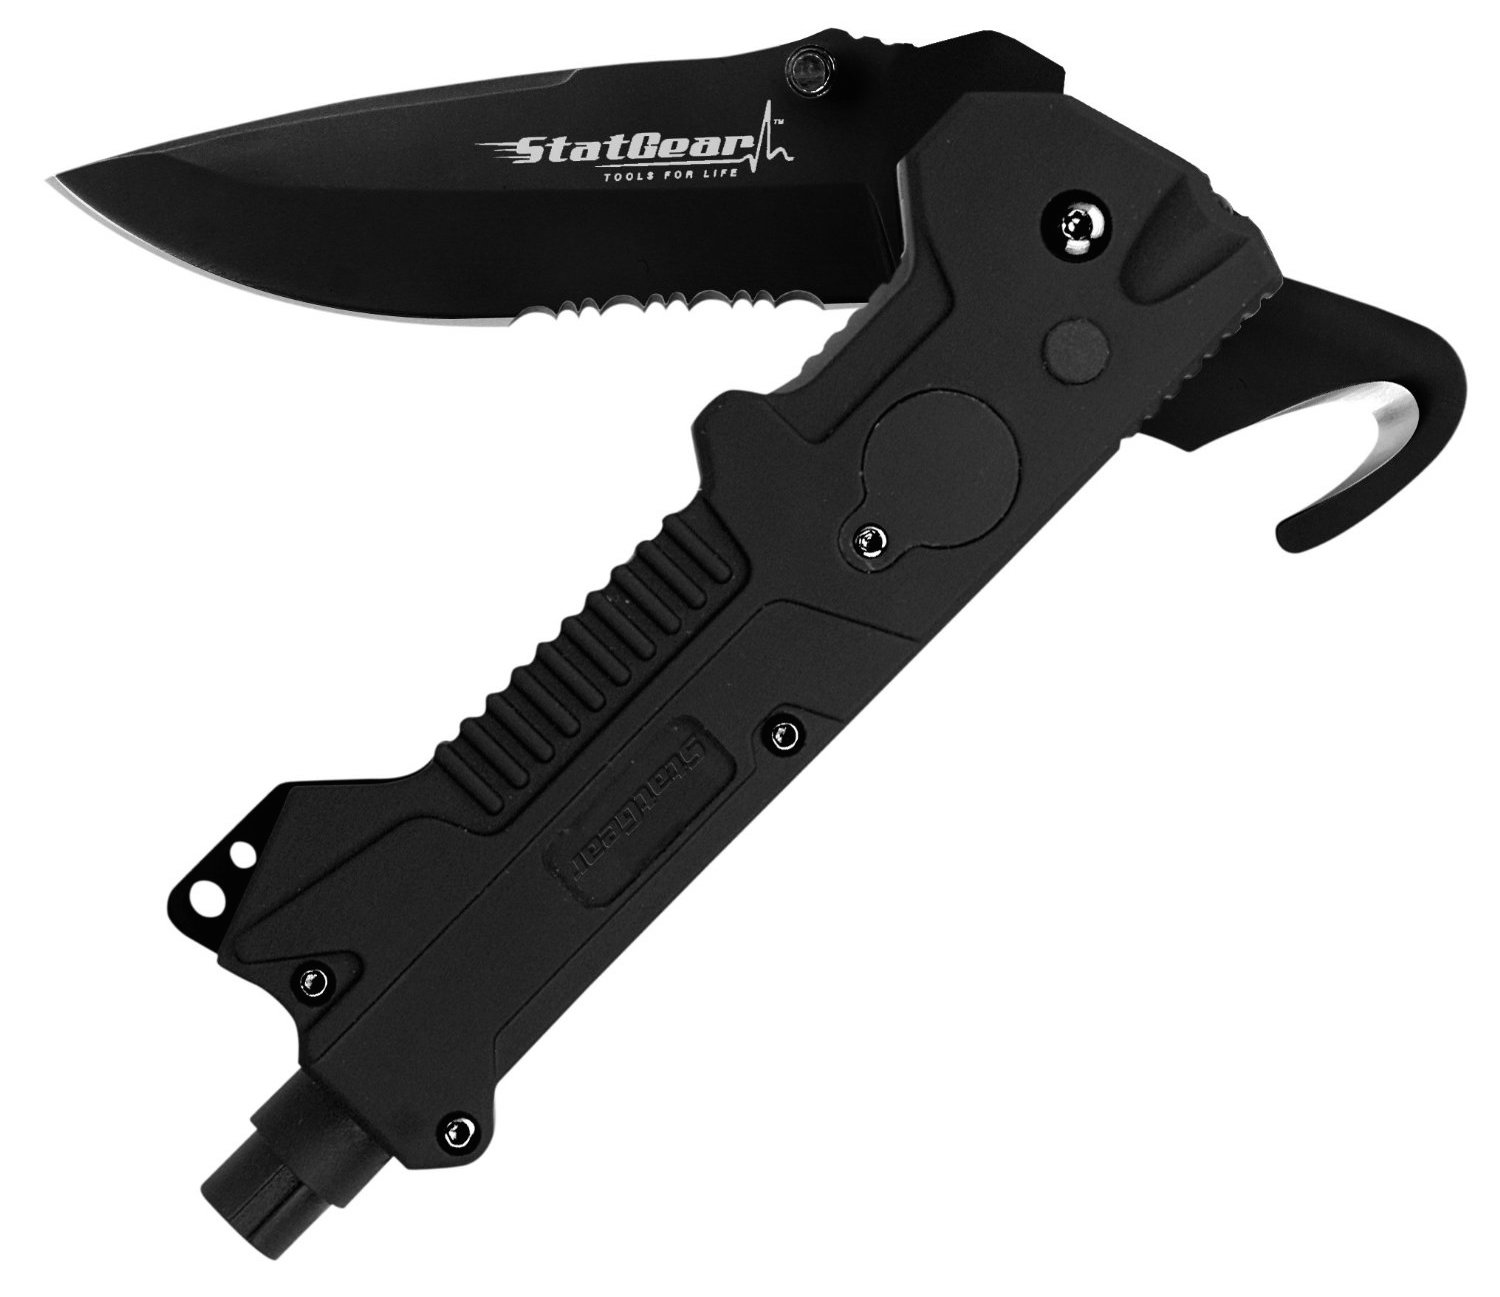 Sports/Fitness: T3 Tactical Multi-Tool $24 (Orig. $40), more